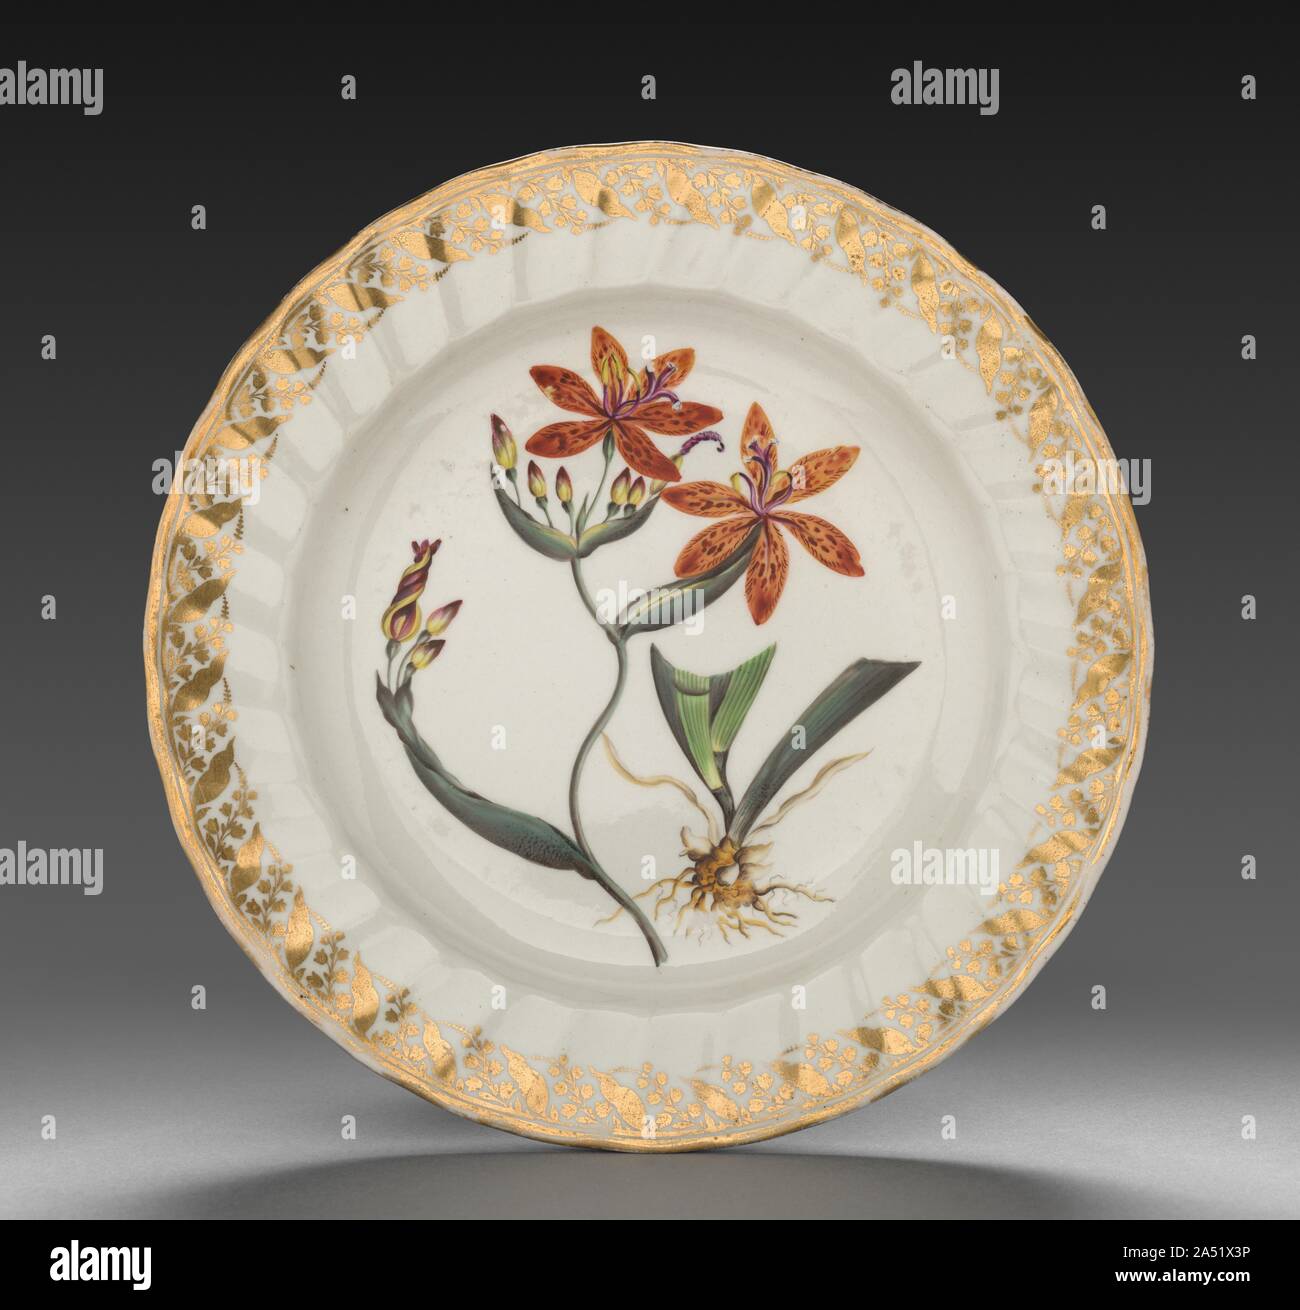 Plate from Dessert Service: Chinese Ixia, c. 1800. Each dish is decorated  with recognizable plants, the names of which are inscribed on the base in  both Latin and English. Identifying the blossoms